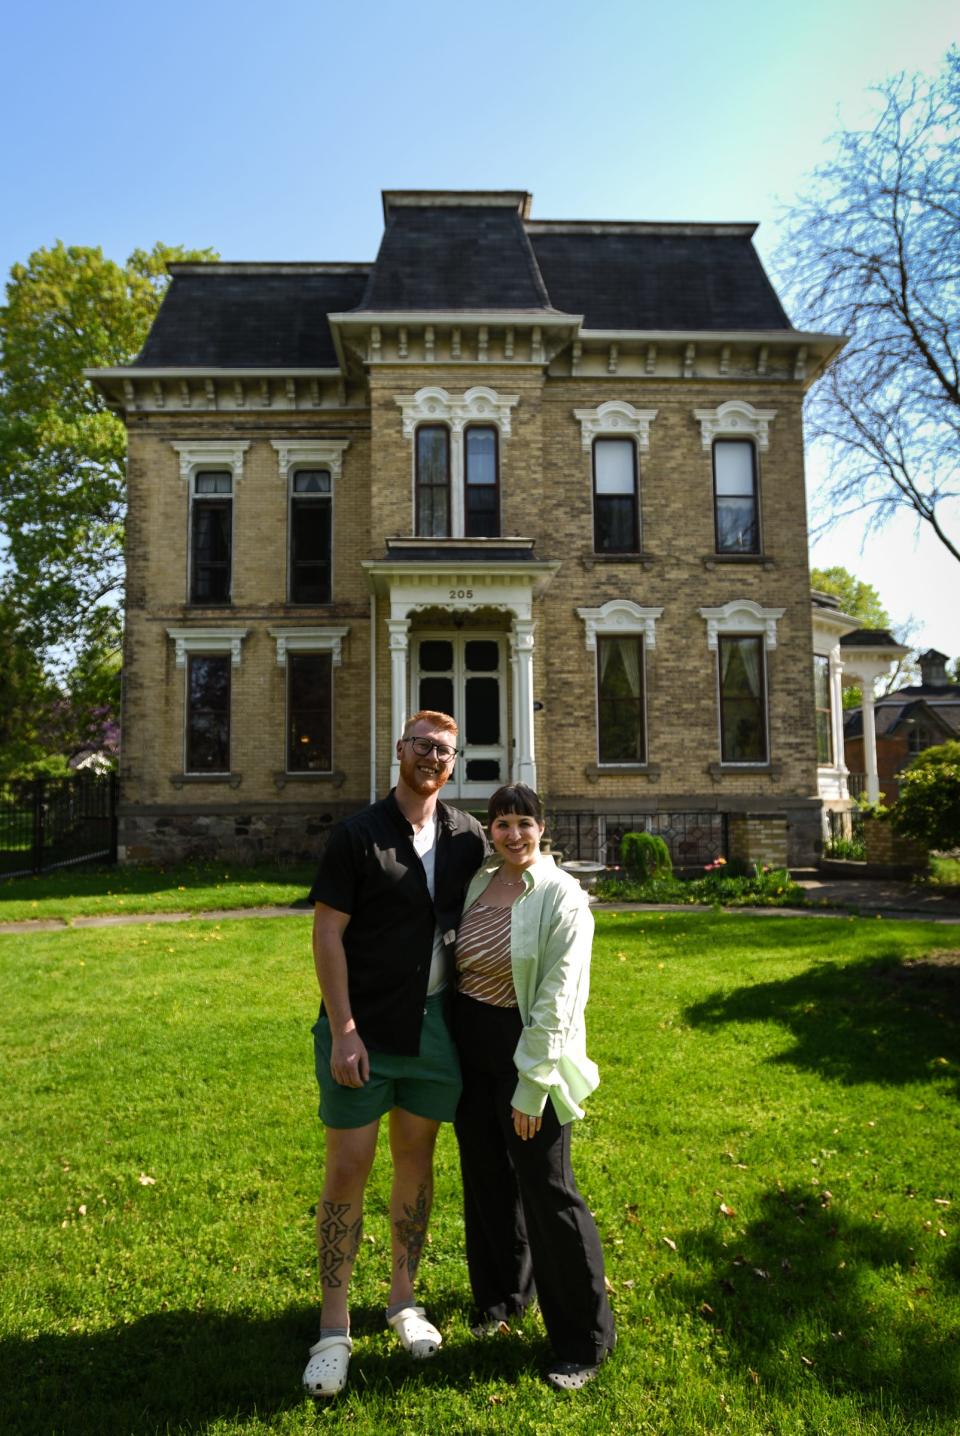 Trevor and Claire Breen, both 31, of St. Johns, pictured Tuesday, May 9, 2023, in front of their home in St. Johns, the historic Hicks Mansion, built in the 1870s.